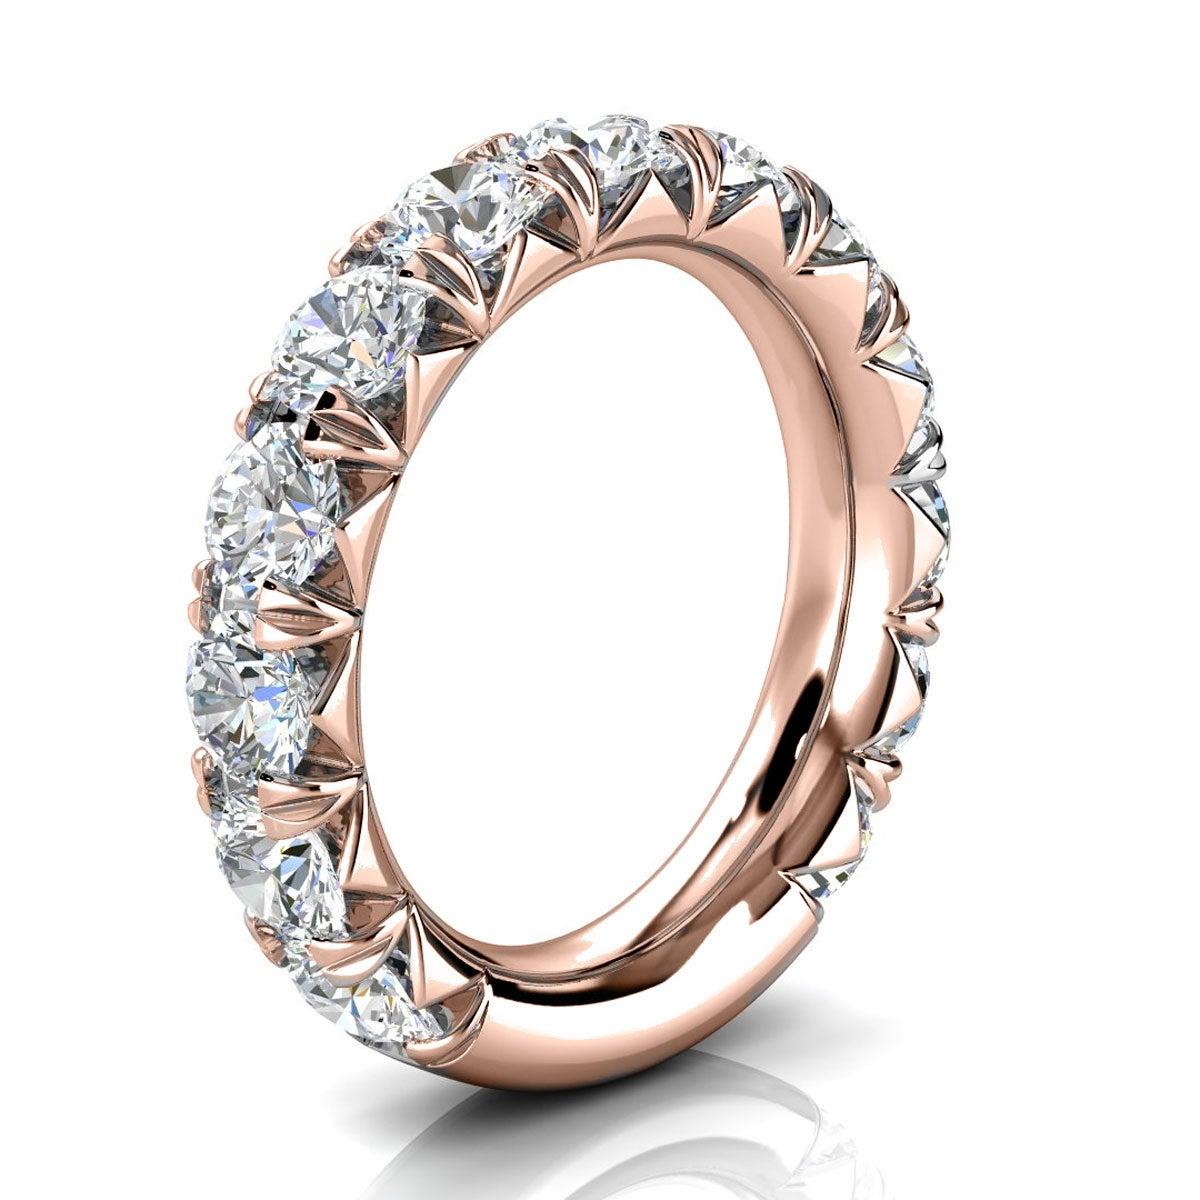 For Sale:  18k Rose Gold GIA French Pave Diamond Ring '3 Ct. Tw' 2